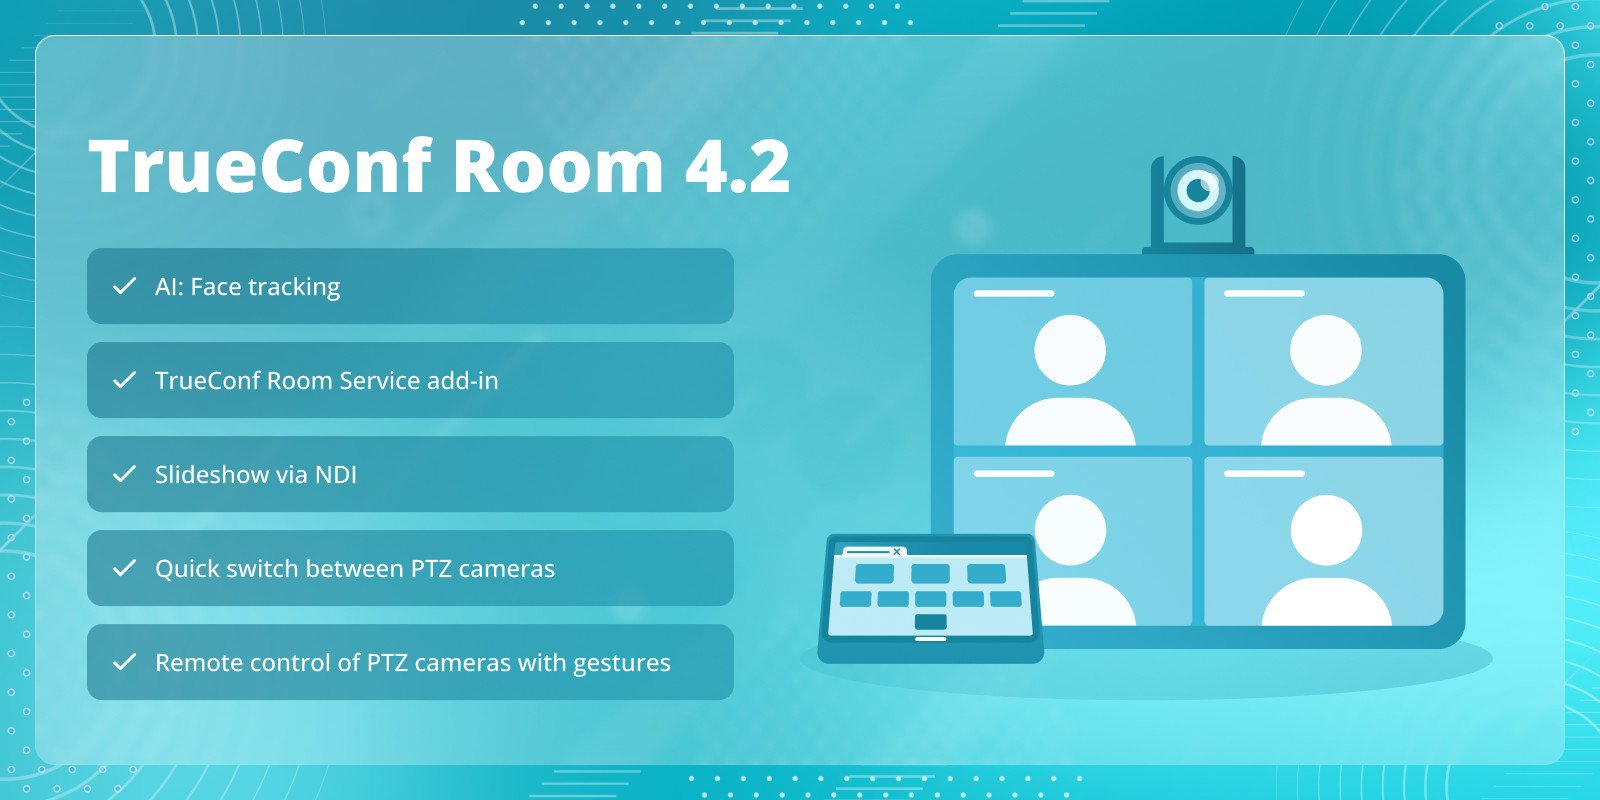 TrueConf Room 4.2: TrueConf Room Service add-in and face tracking 6